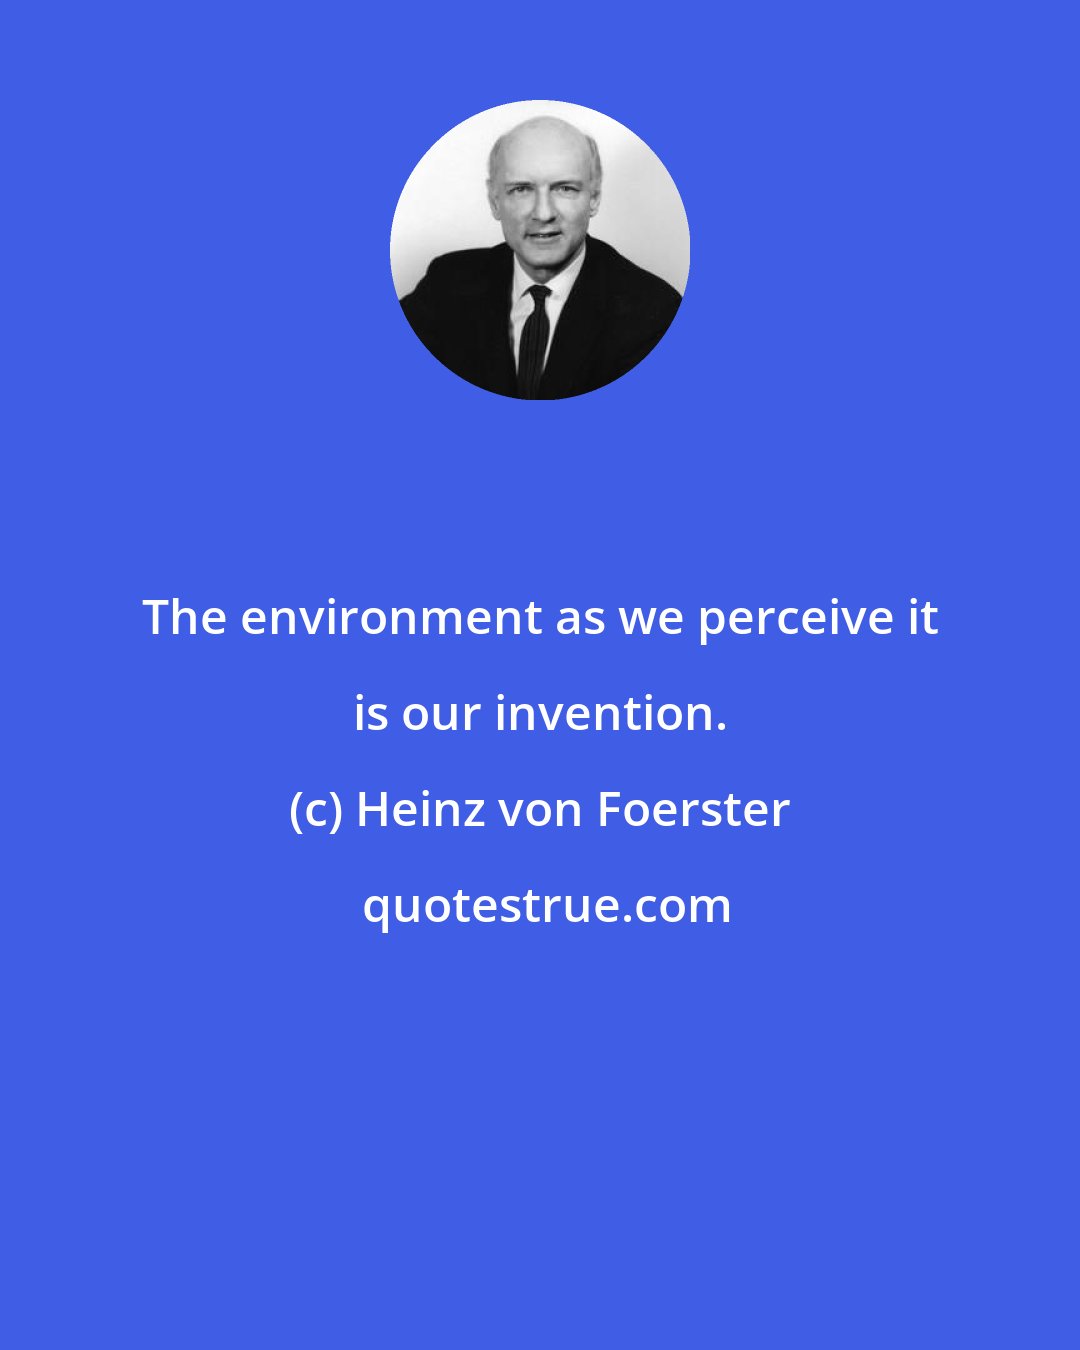 Heinz von Foerster: The environment as we perceive it is our invention.